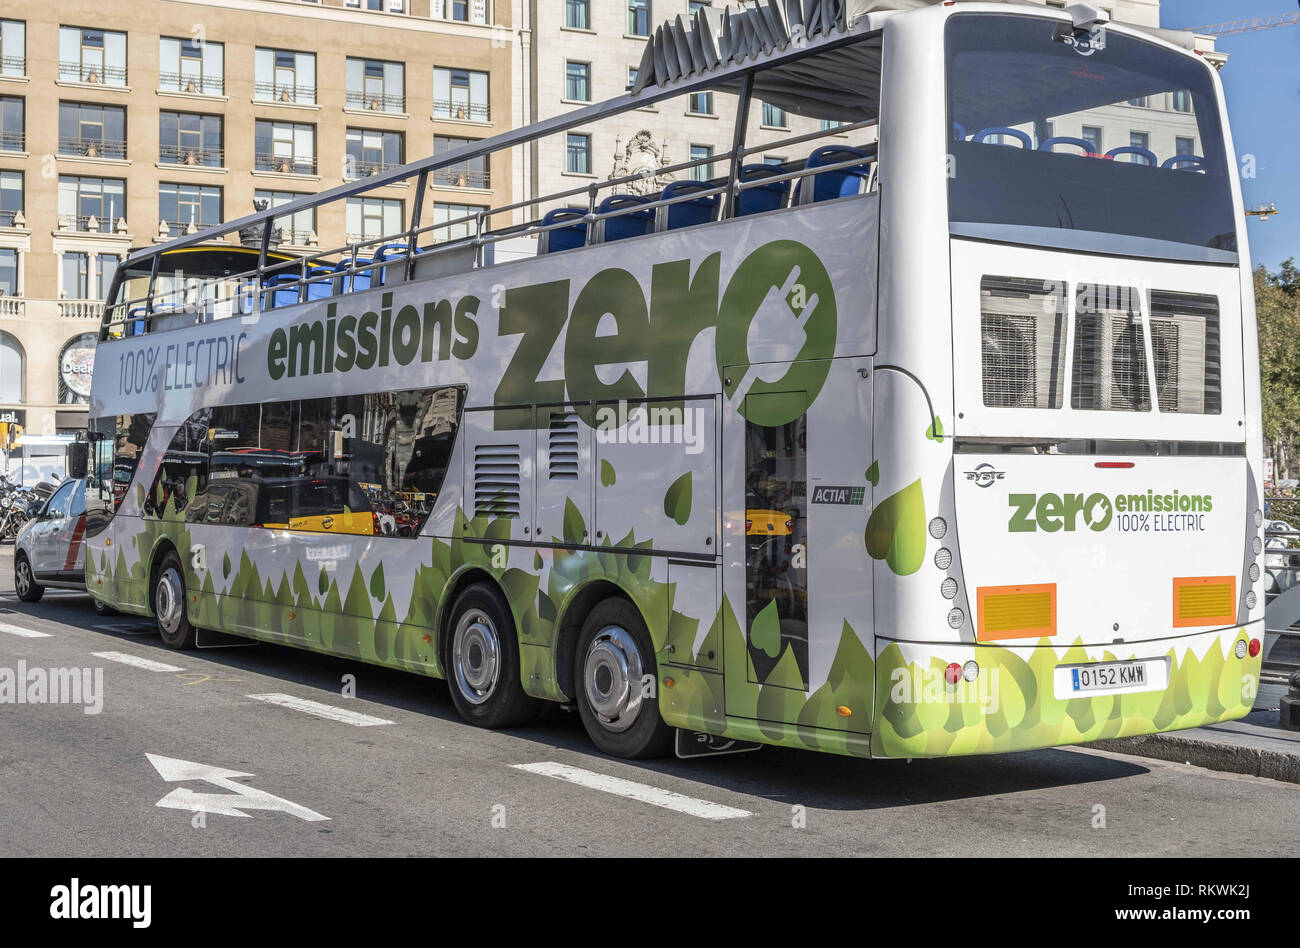 February 12, 2019 - Barcelona, Catalonia, Spain - The 100% electric Ayats Electric bus dedicated to tourist routes in the city of Barcelona is seen in Plaza Catalunya during operational tests..The city of Barcelona is hopping to have electricity powered bus to start running the tourist route later this year. (Credit Image: © Paco Freire/SOPA Images via ZUMA Wire) Stock Photo